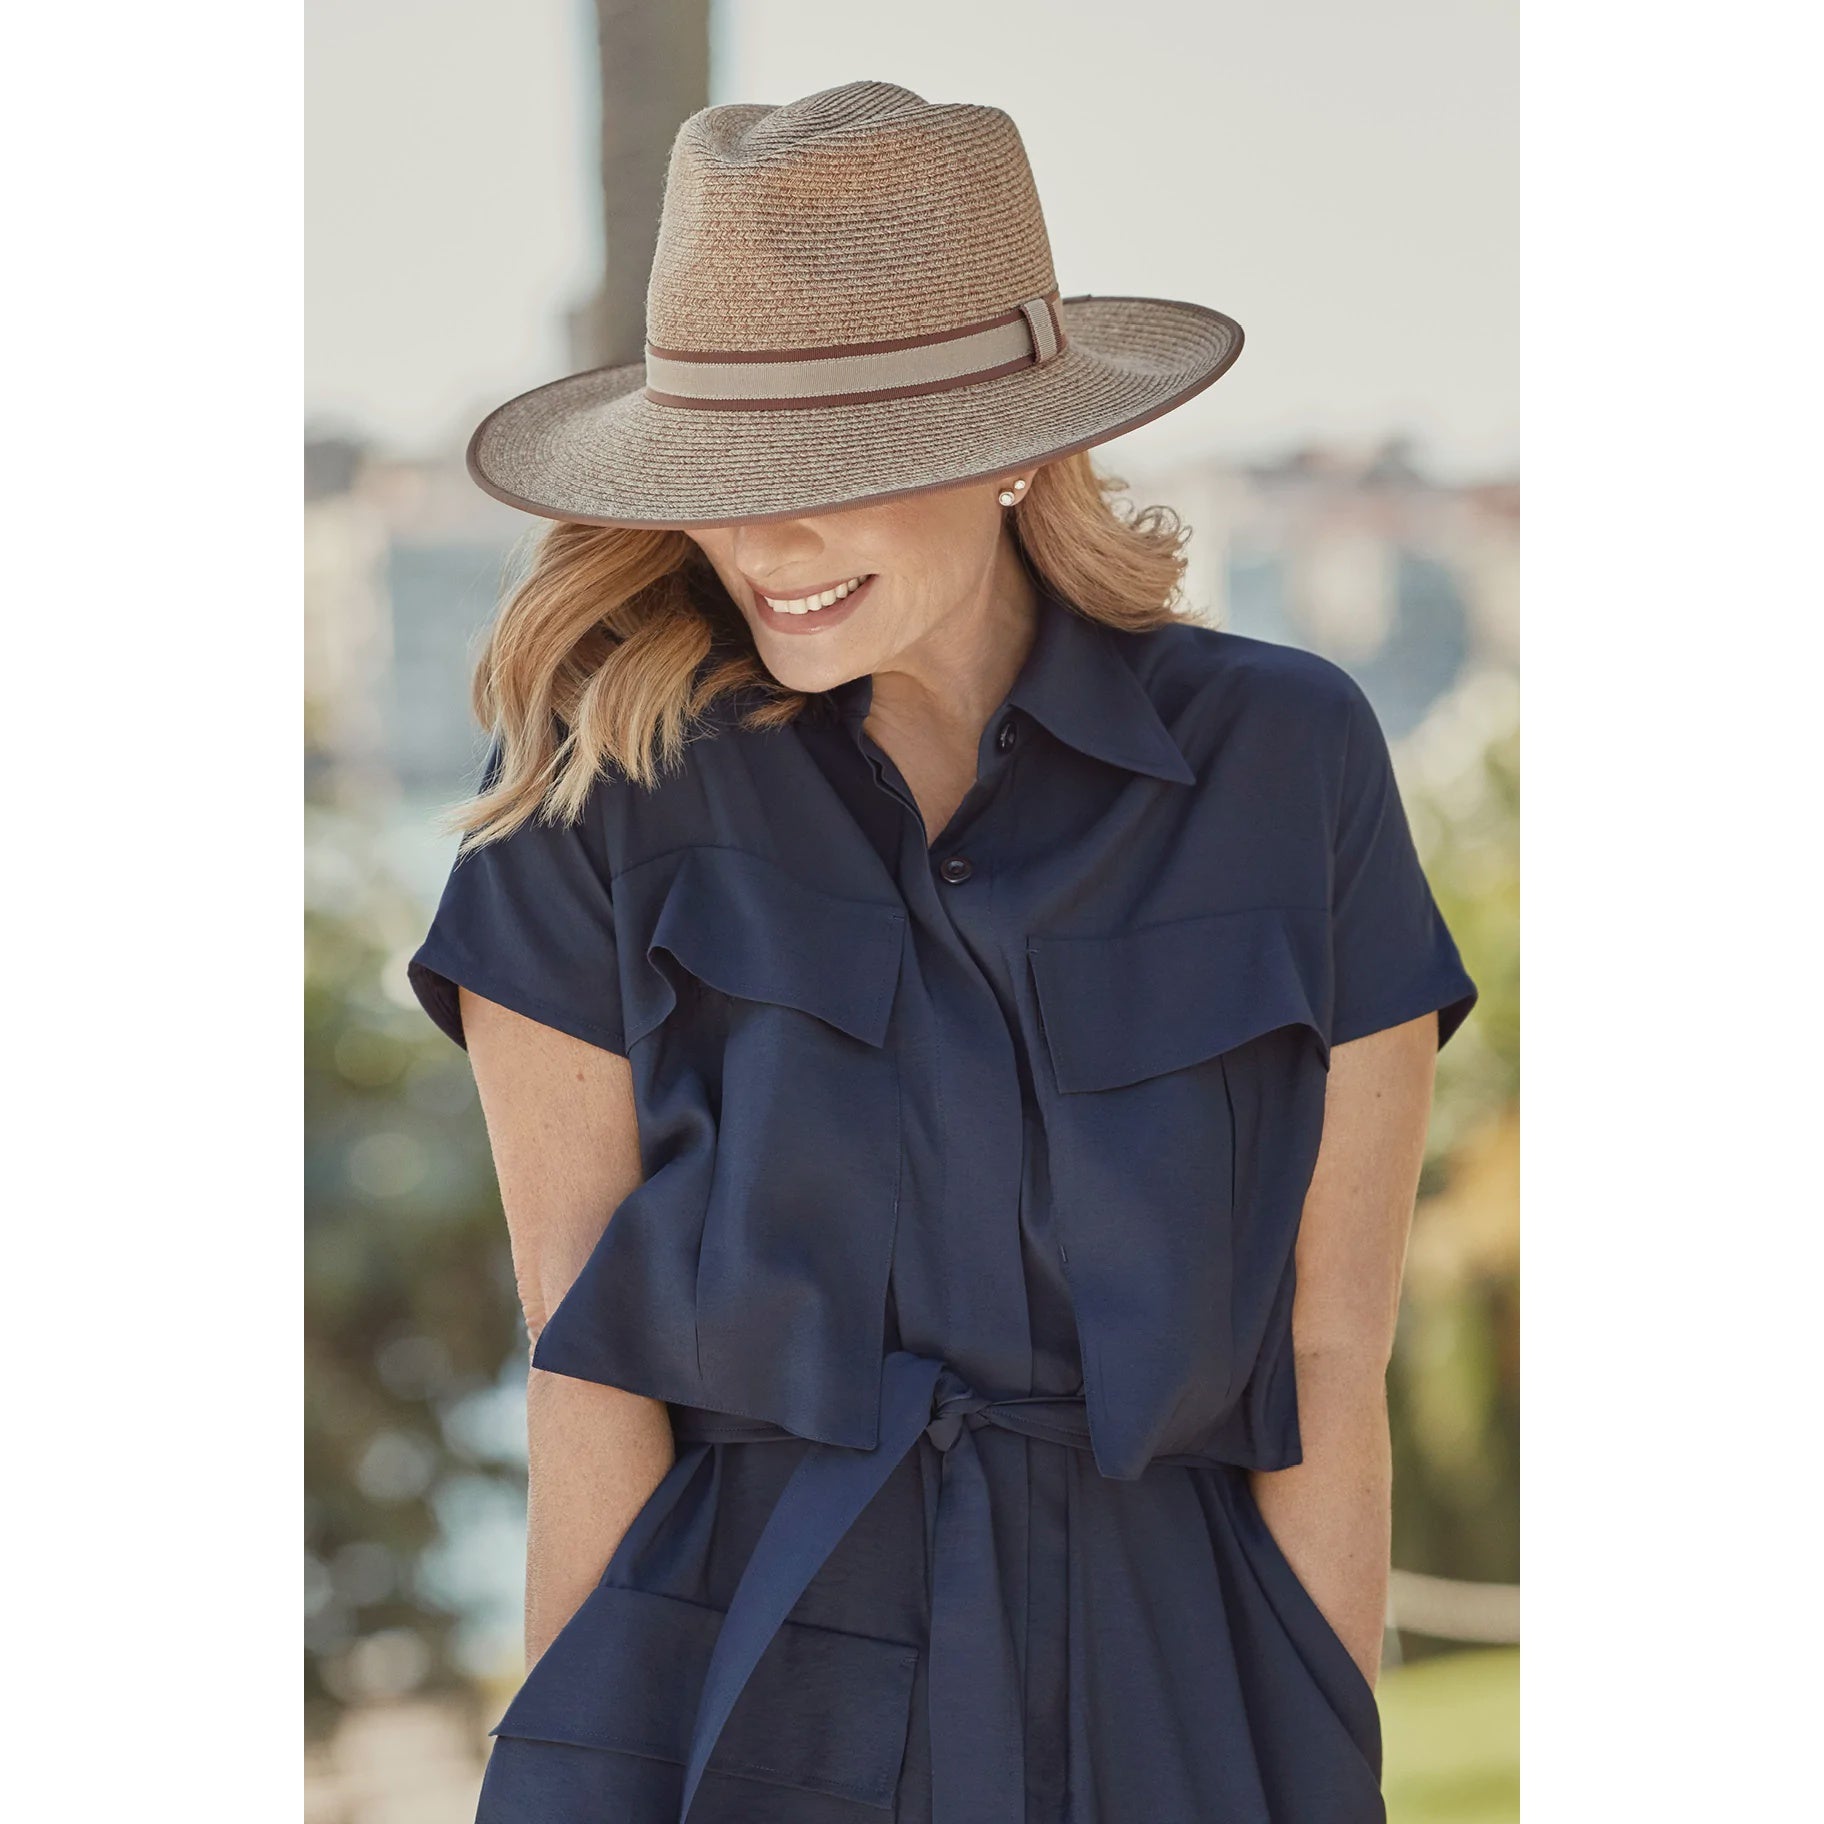 Canopy Bay Royston Fedora - Camel  Canopy Bay Pisces Boutique